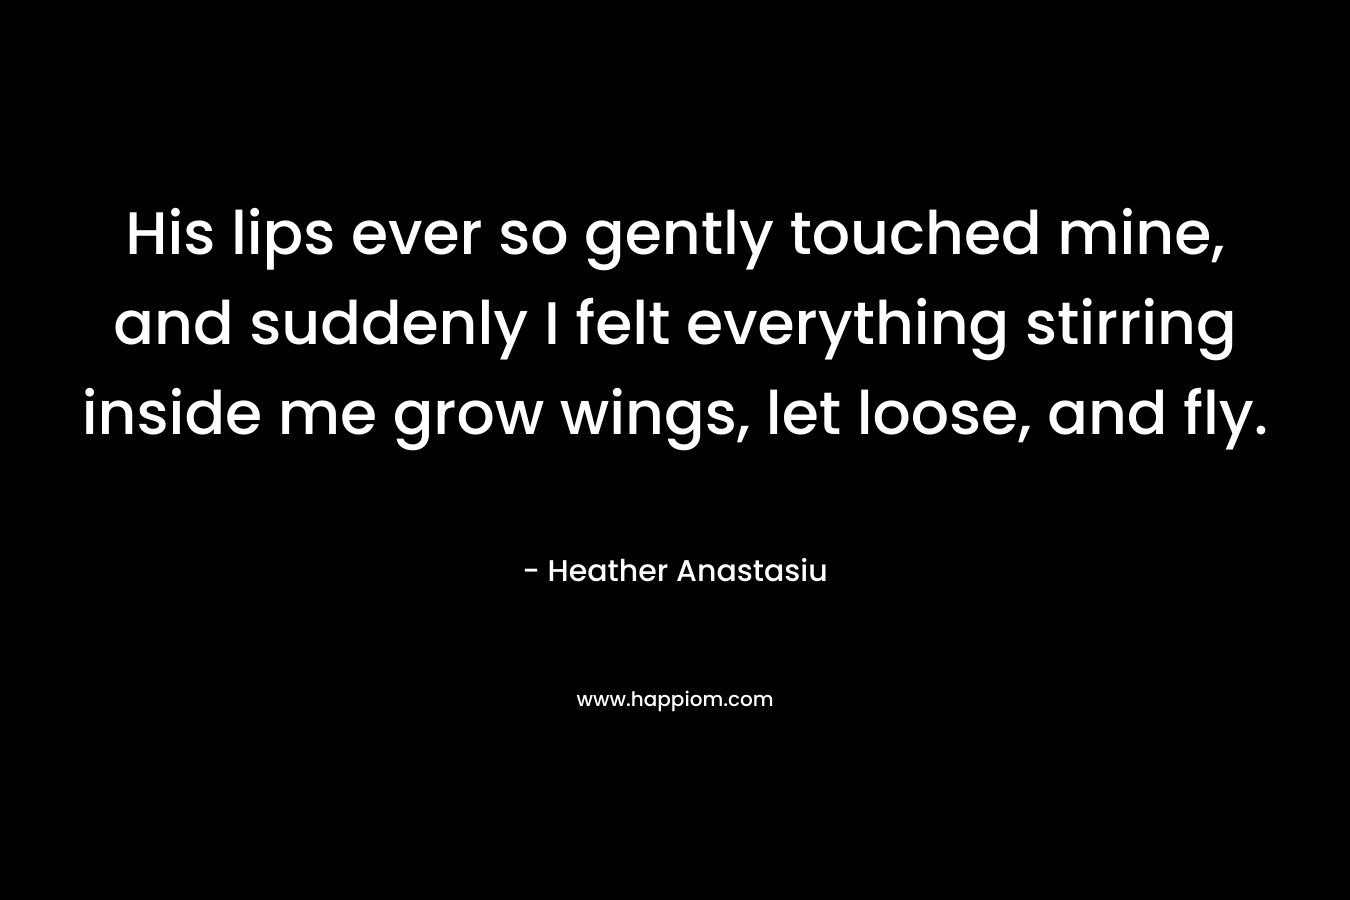 His lips ever so gently touched mine, and suddenly I felt everything stirring inside me grow wings, let loose, and fly. – Heather Anastasiu